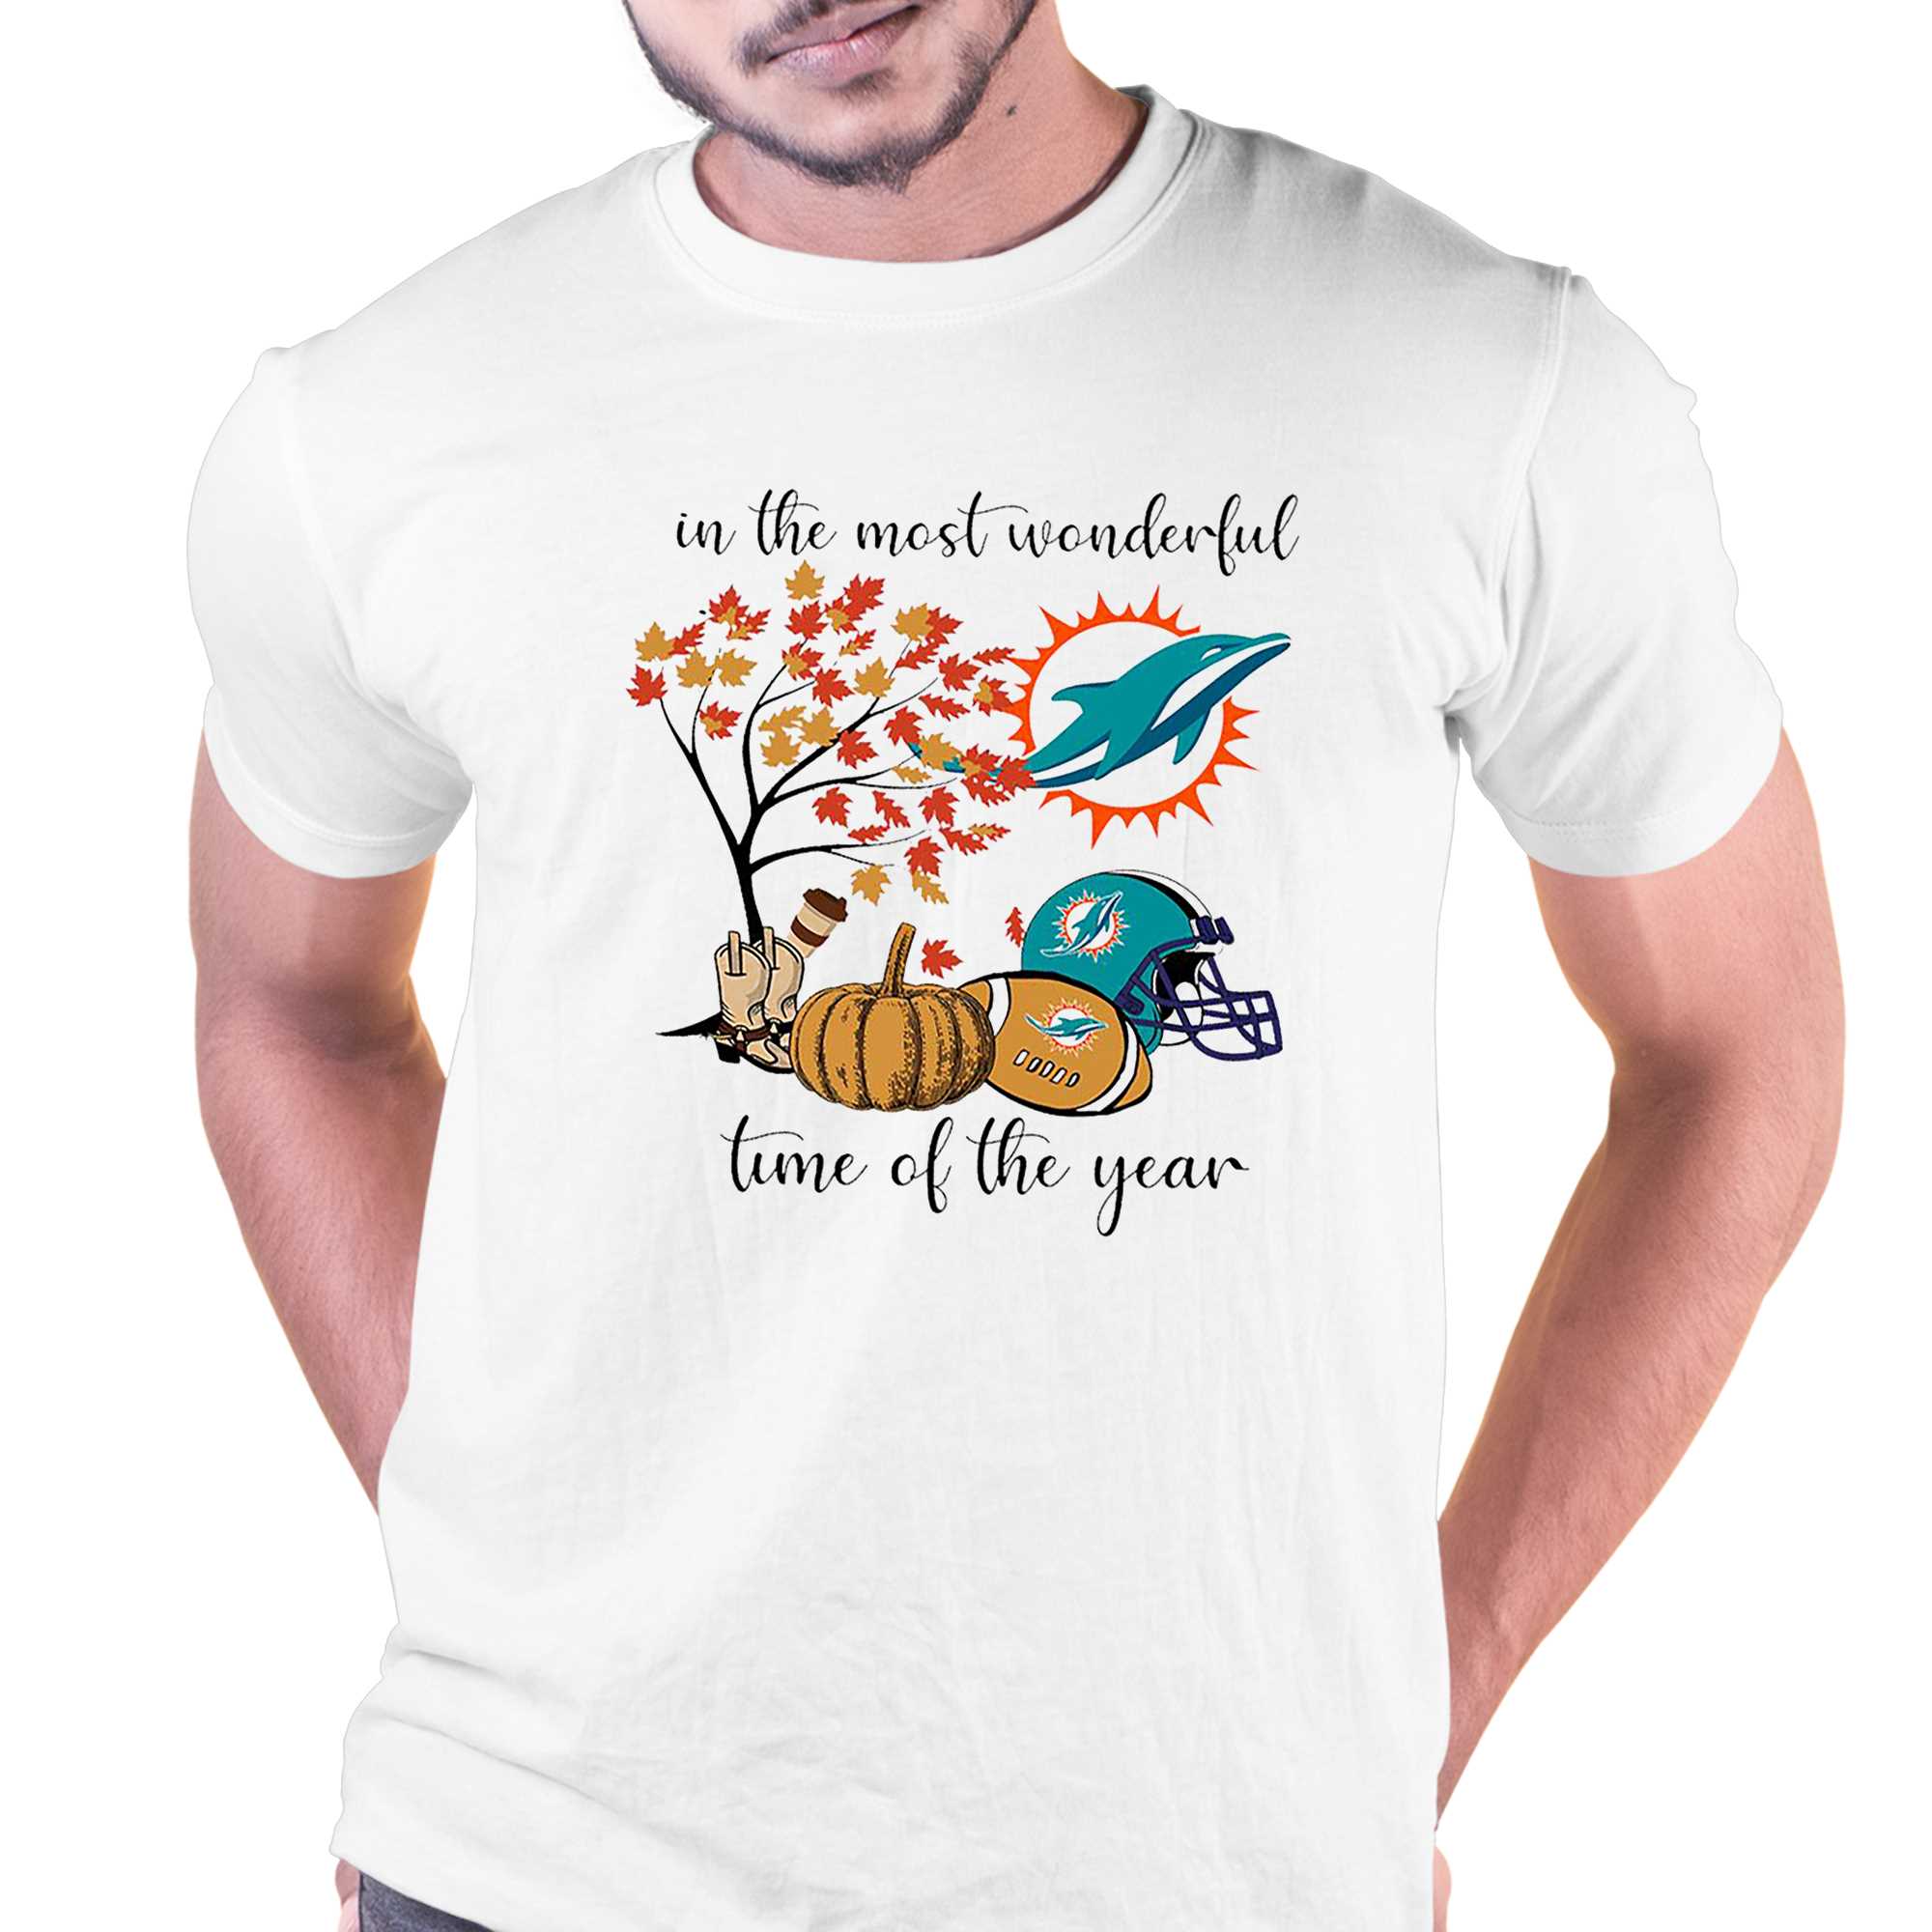 dolphins tee shirts